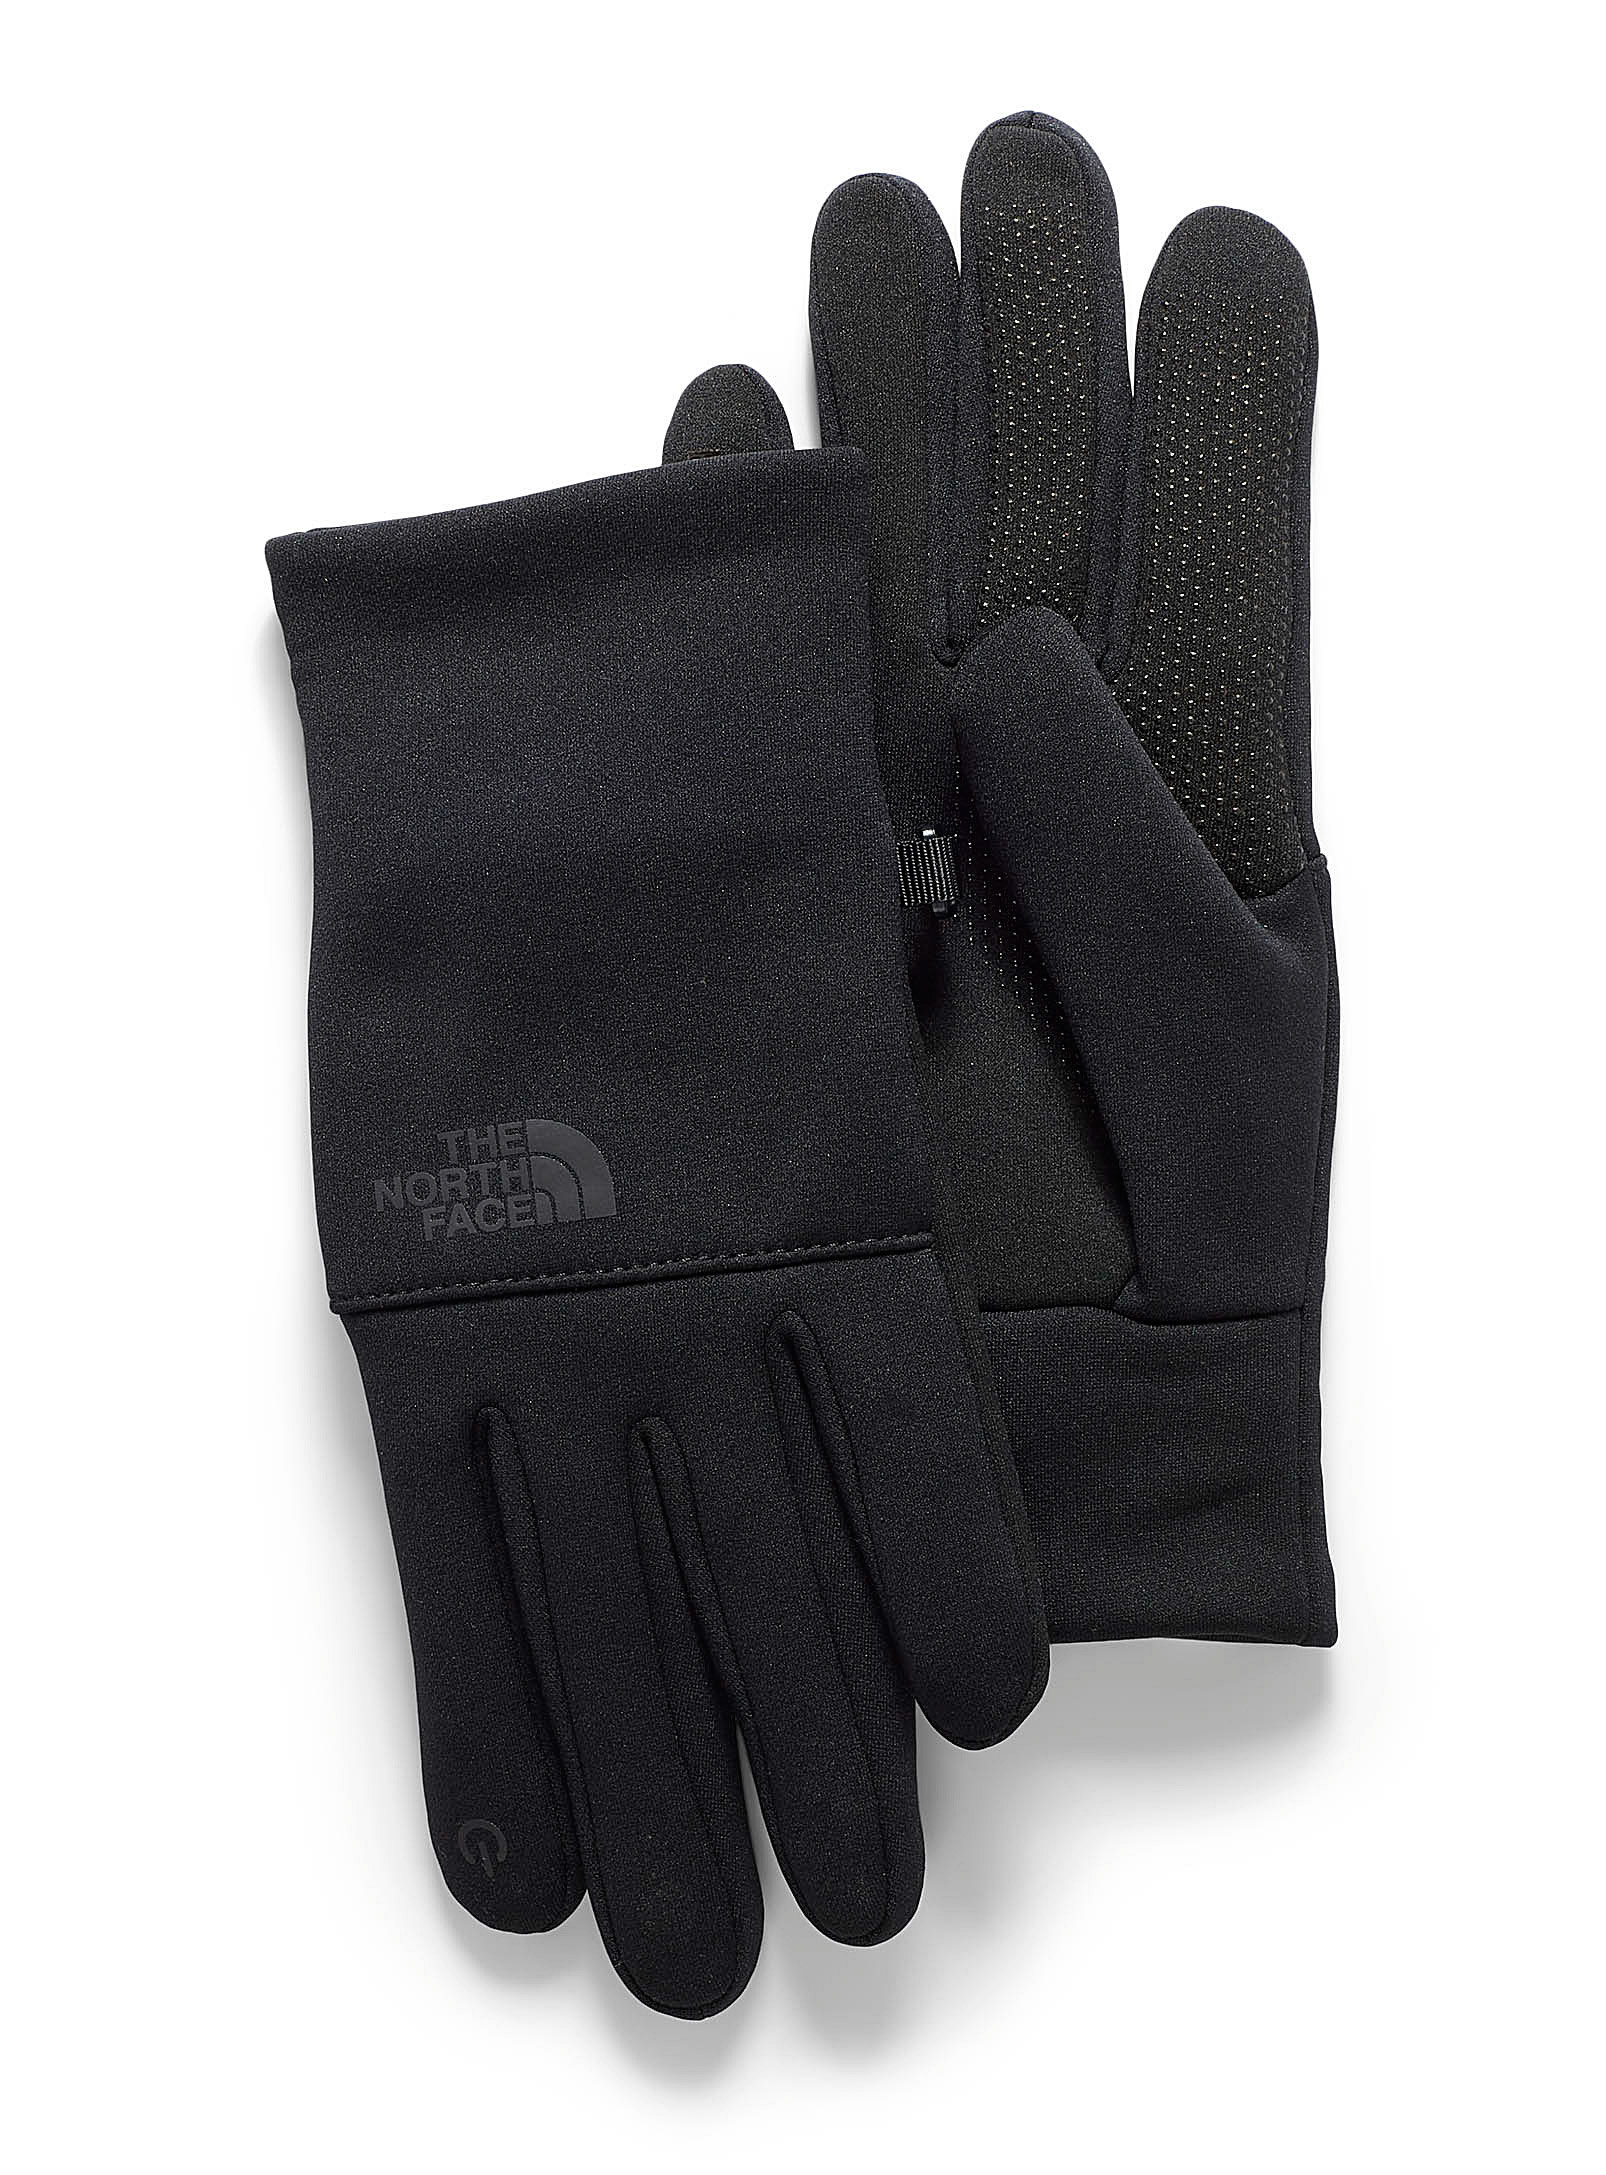 A pair of gloves on a white background